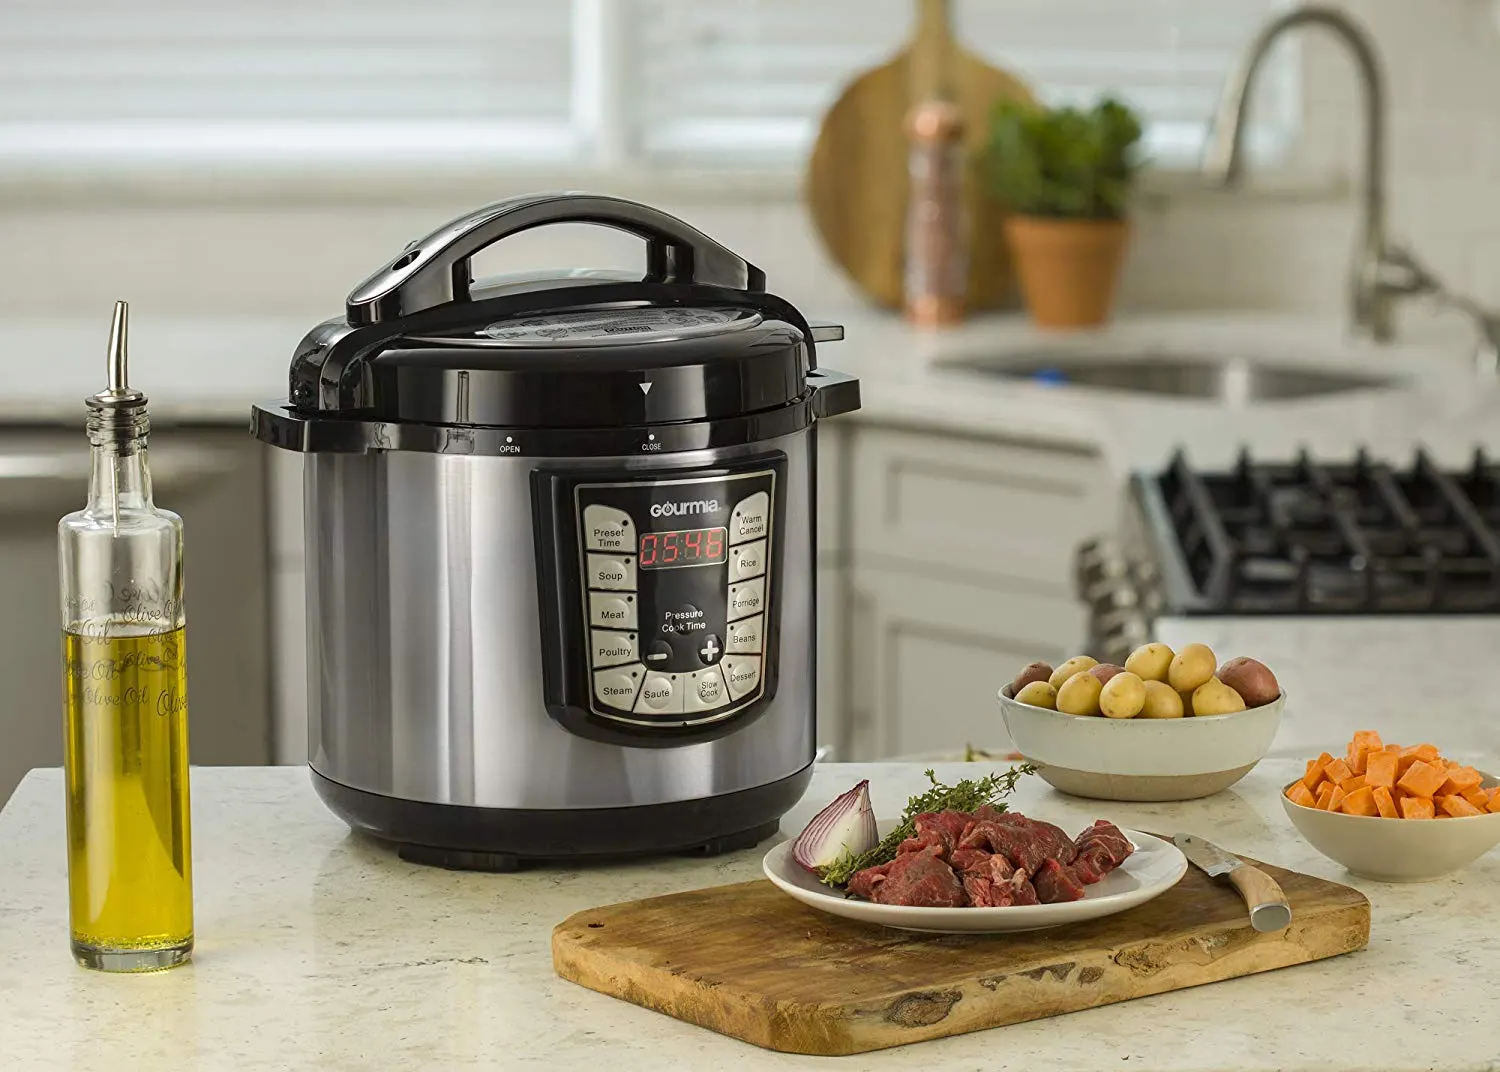 How To Open An Electric Pressure Cooker